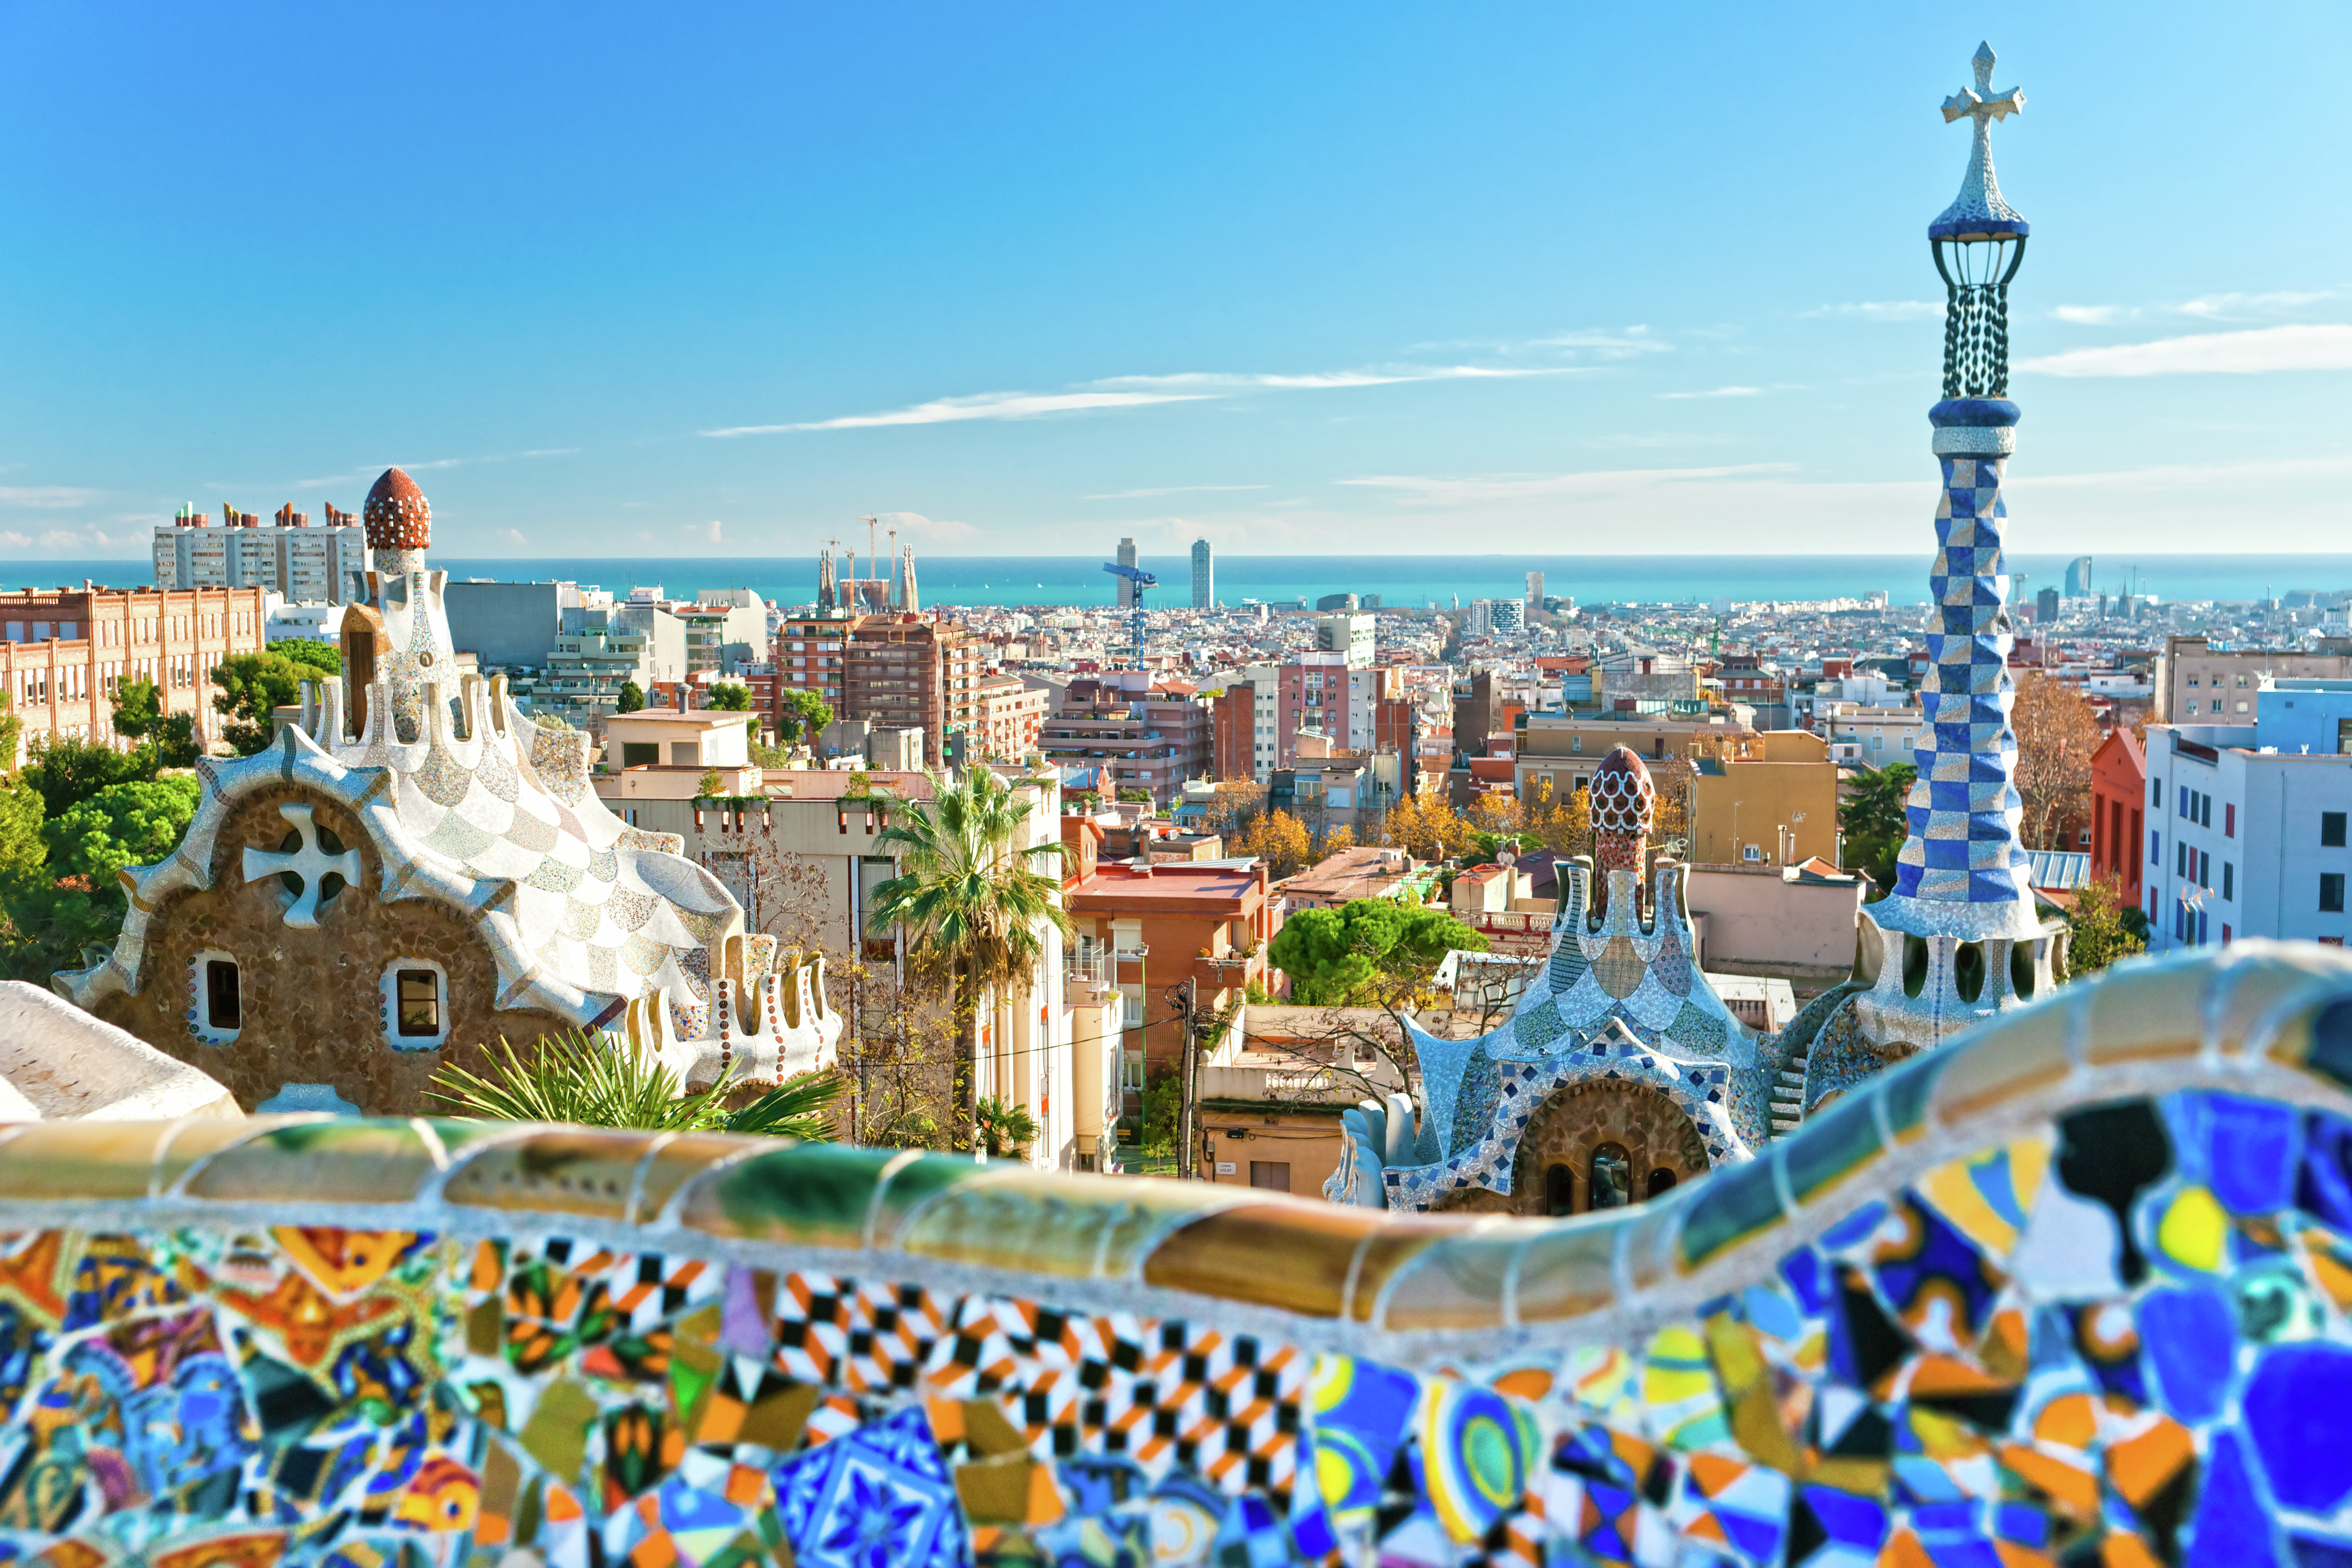 Barcelona plans to bar apartment rentals to tourists starting in 2028